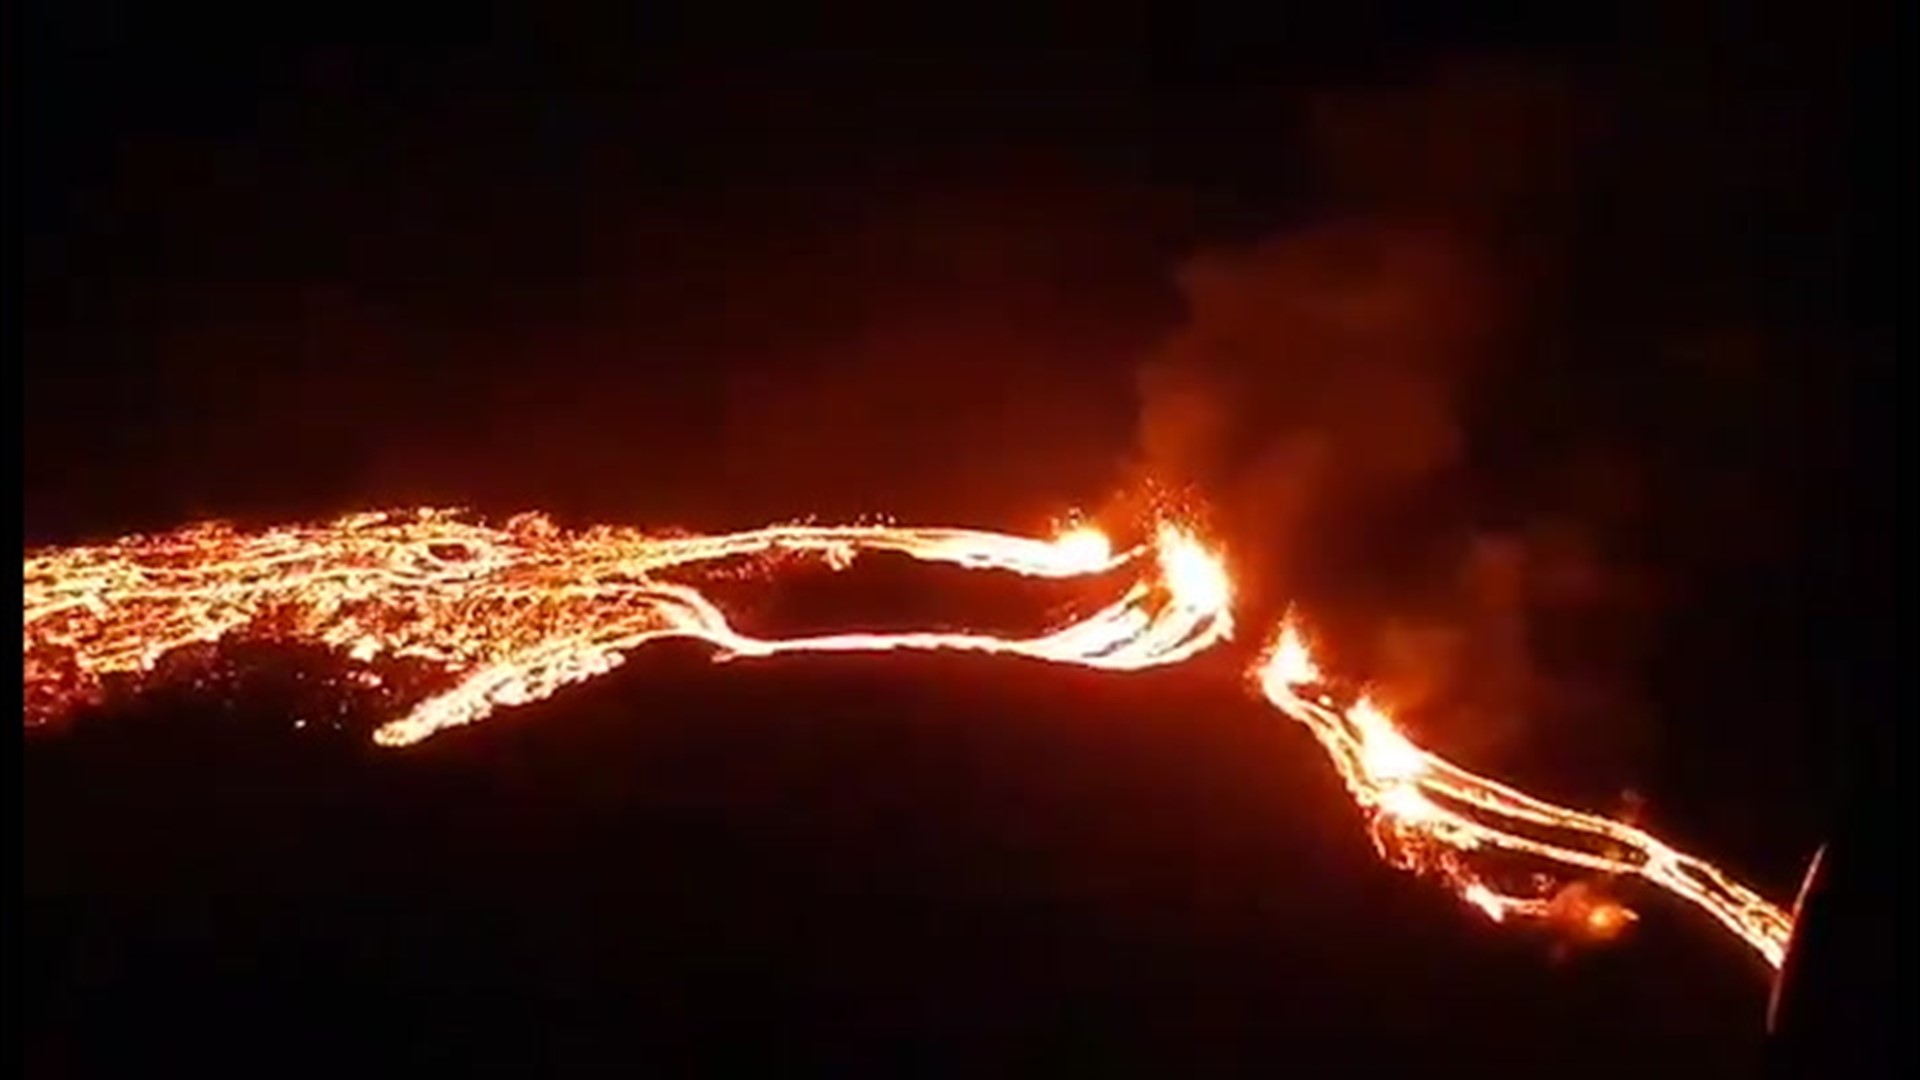 Following an uptick in seismic activity on the Reykjanes Peninsula for weeks, a volcano erupted on March 19, spewing lava and ash through the Geldingardalur Valley.